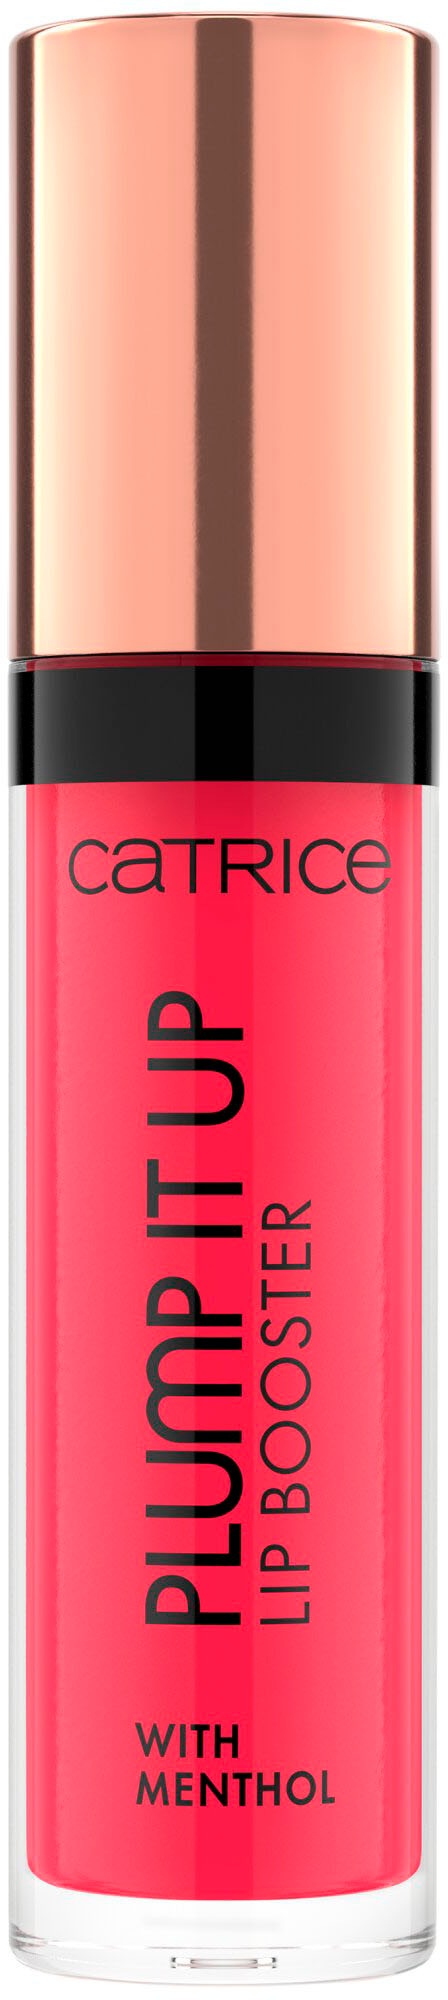 Catrice Lip-Booster Up Booster«, (Set, It online »Plump Lip | tlg.) UNIVERSAL 3 kaufen